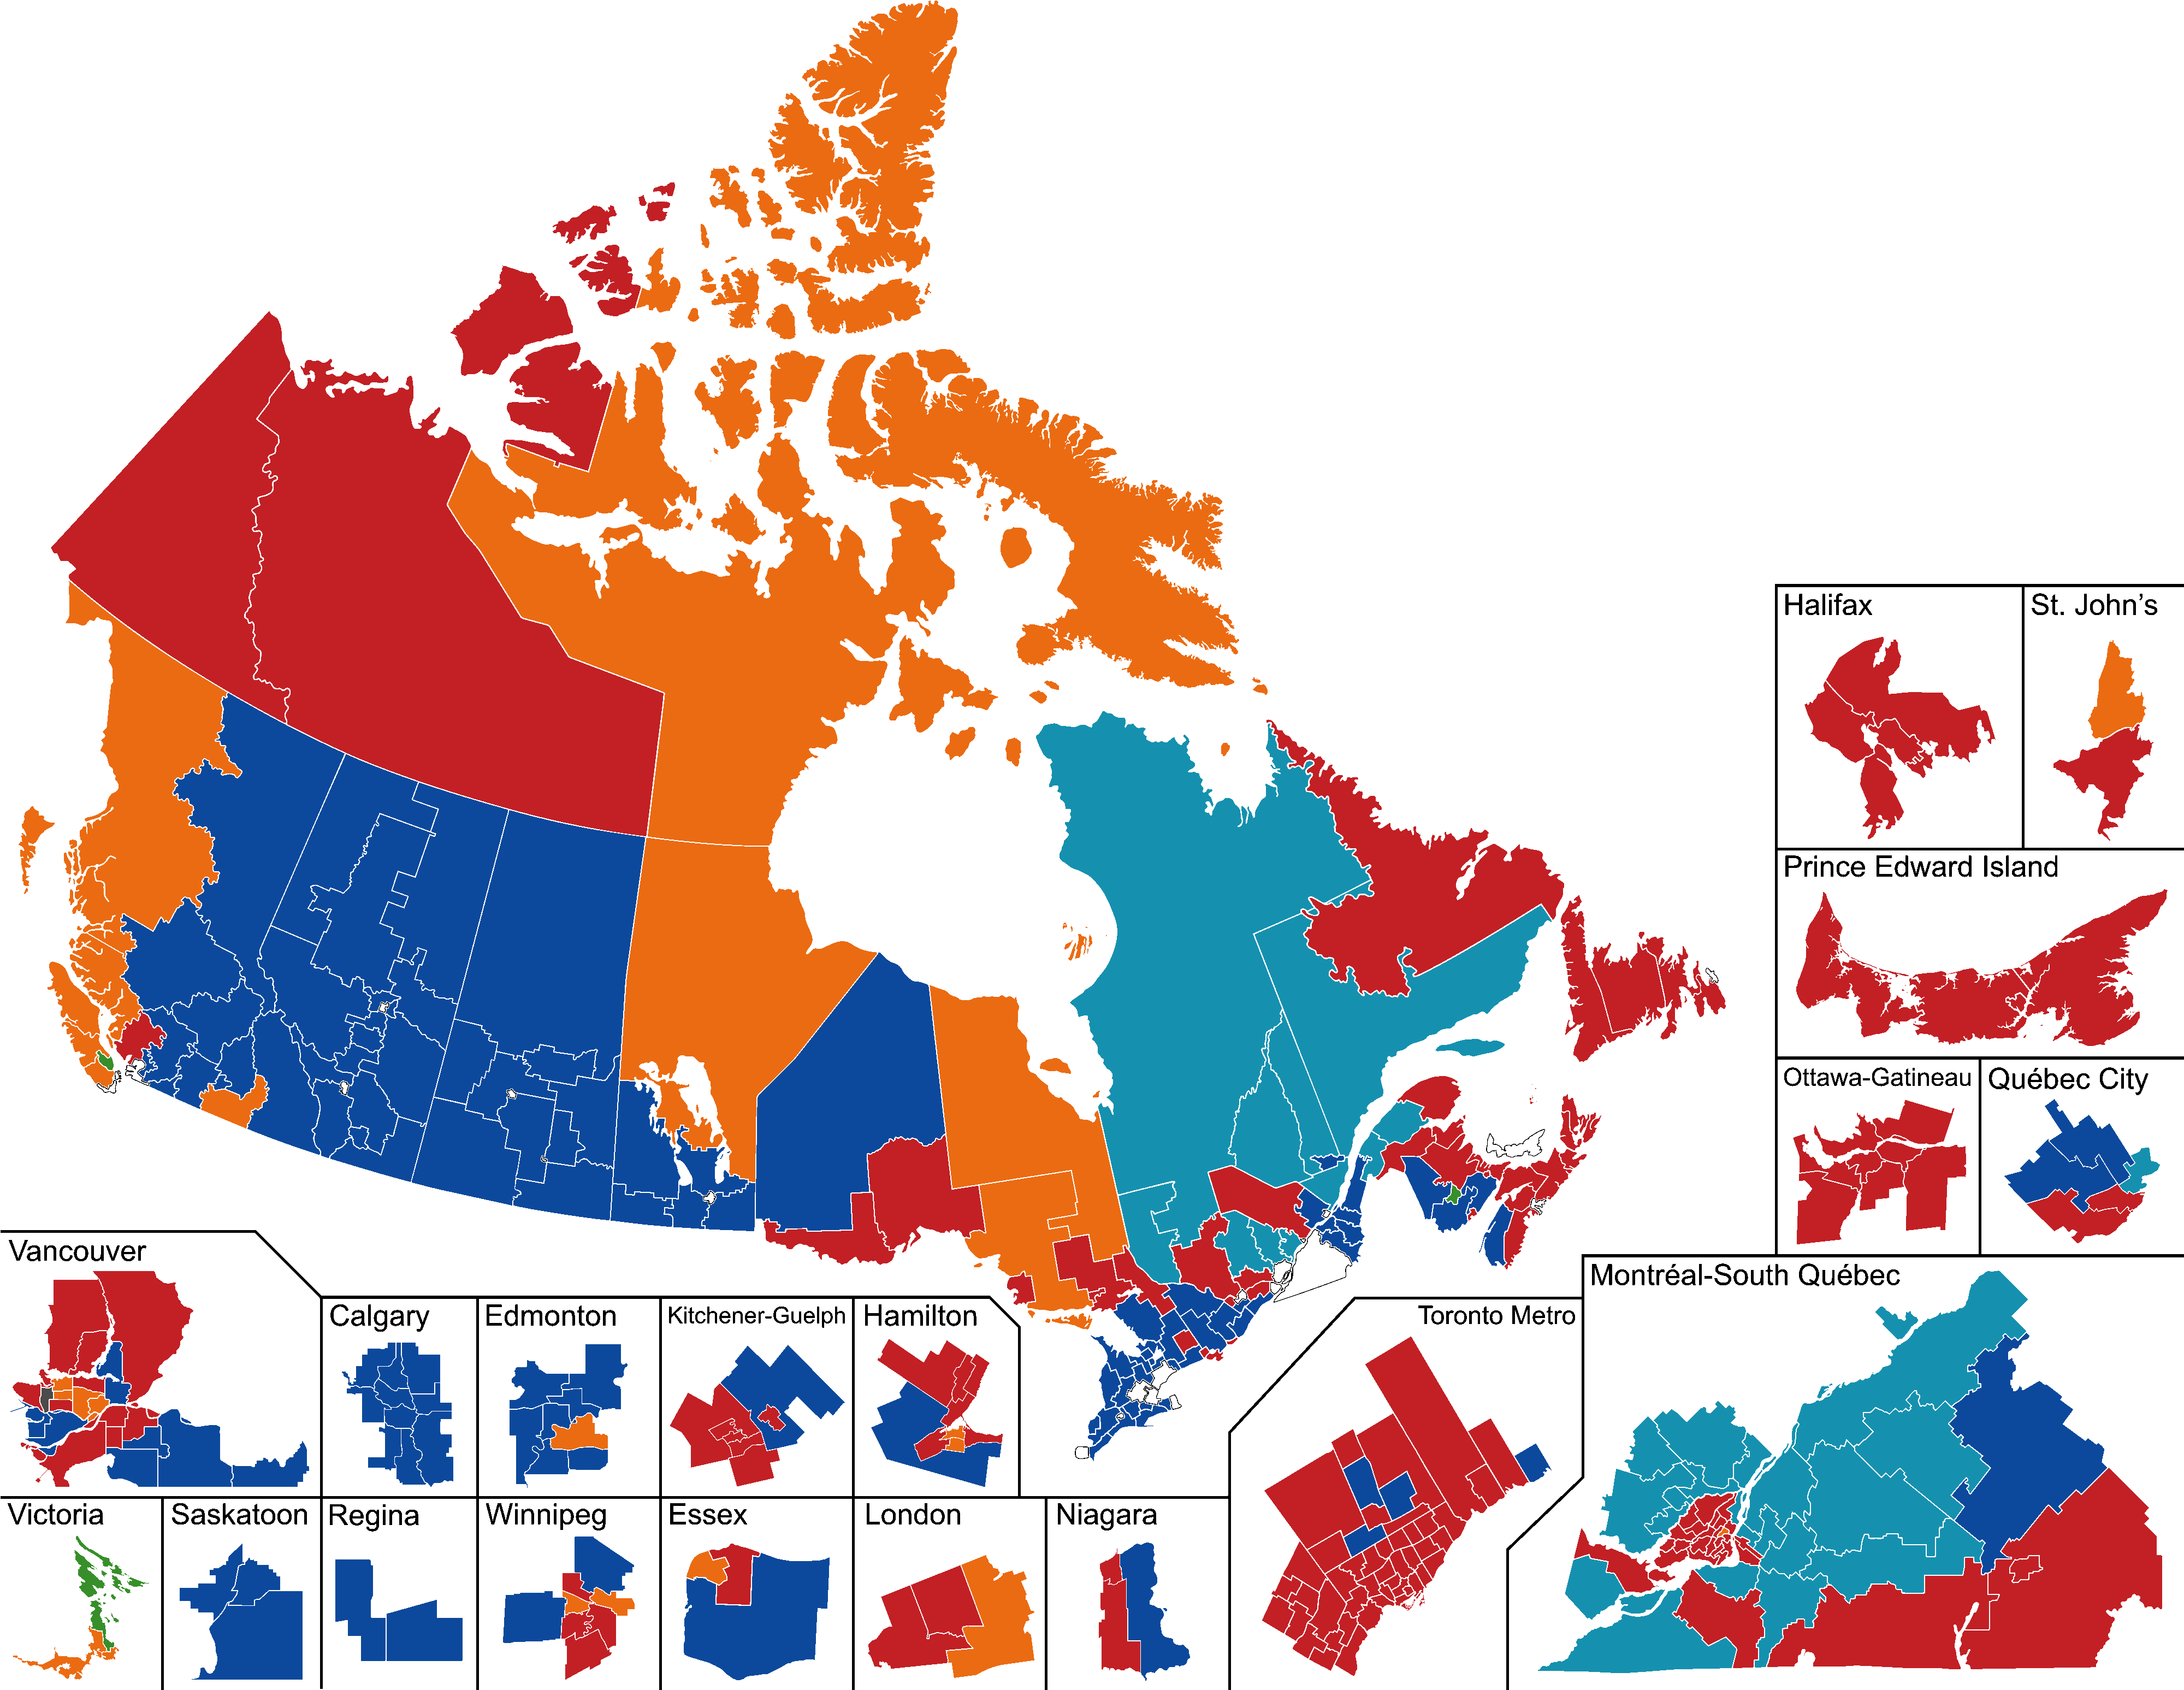 A Map Of Canada With Different Colored Countries/regions